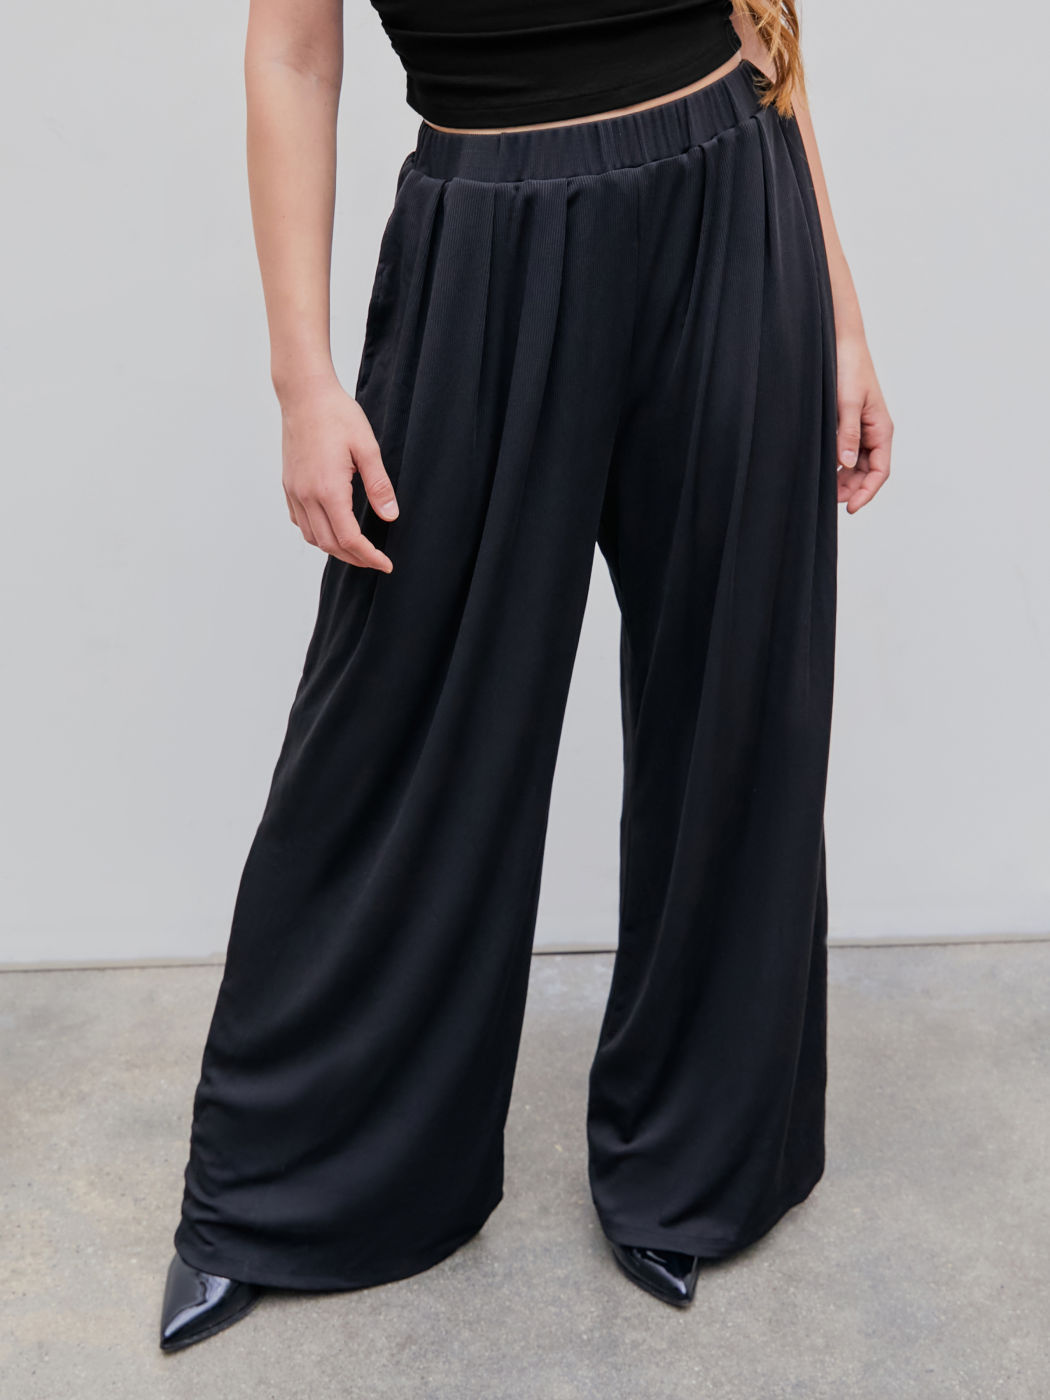 2023 Amazon independent station new European and American casual elastic elastic waist pants wide leg pants plus size loose women's clothing